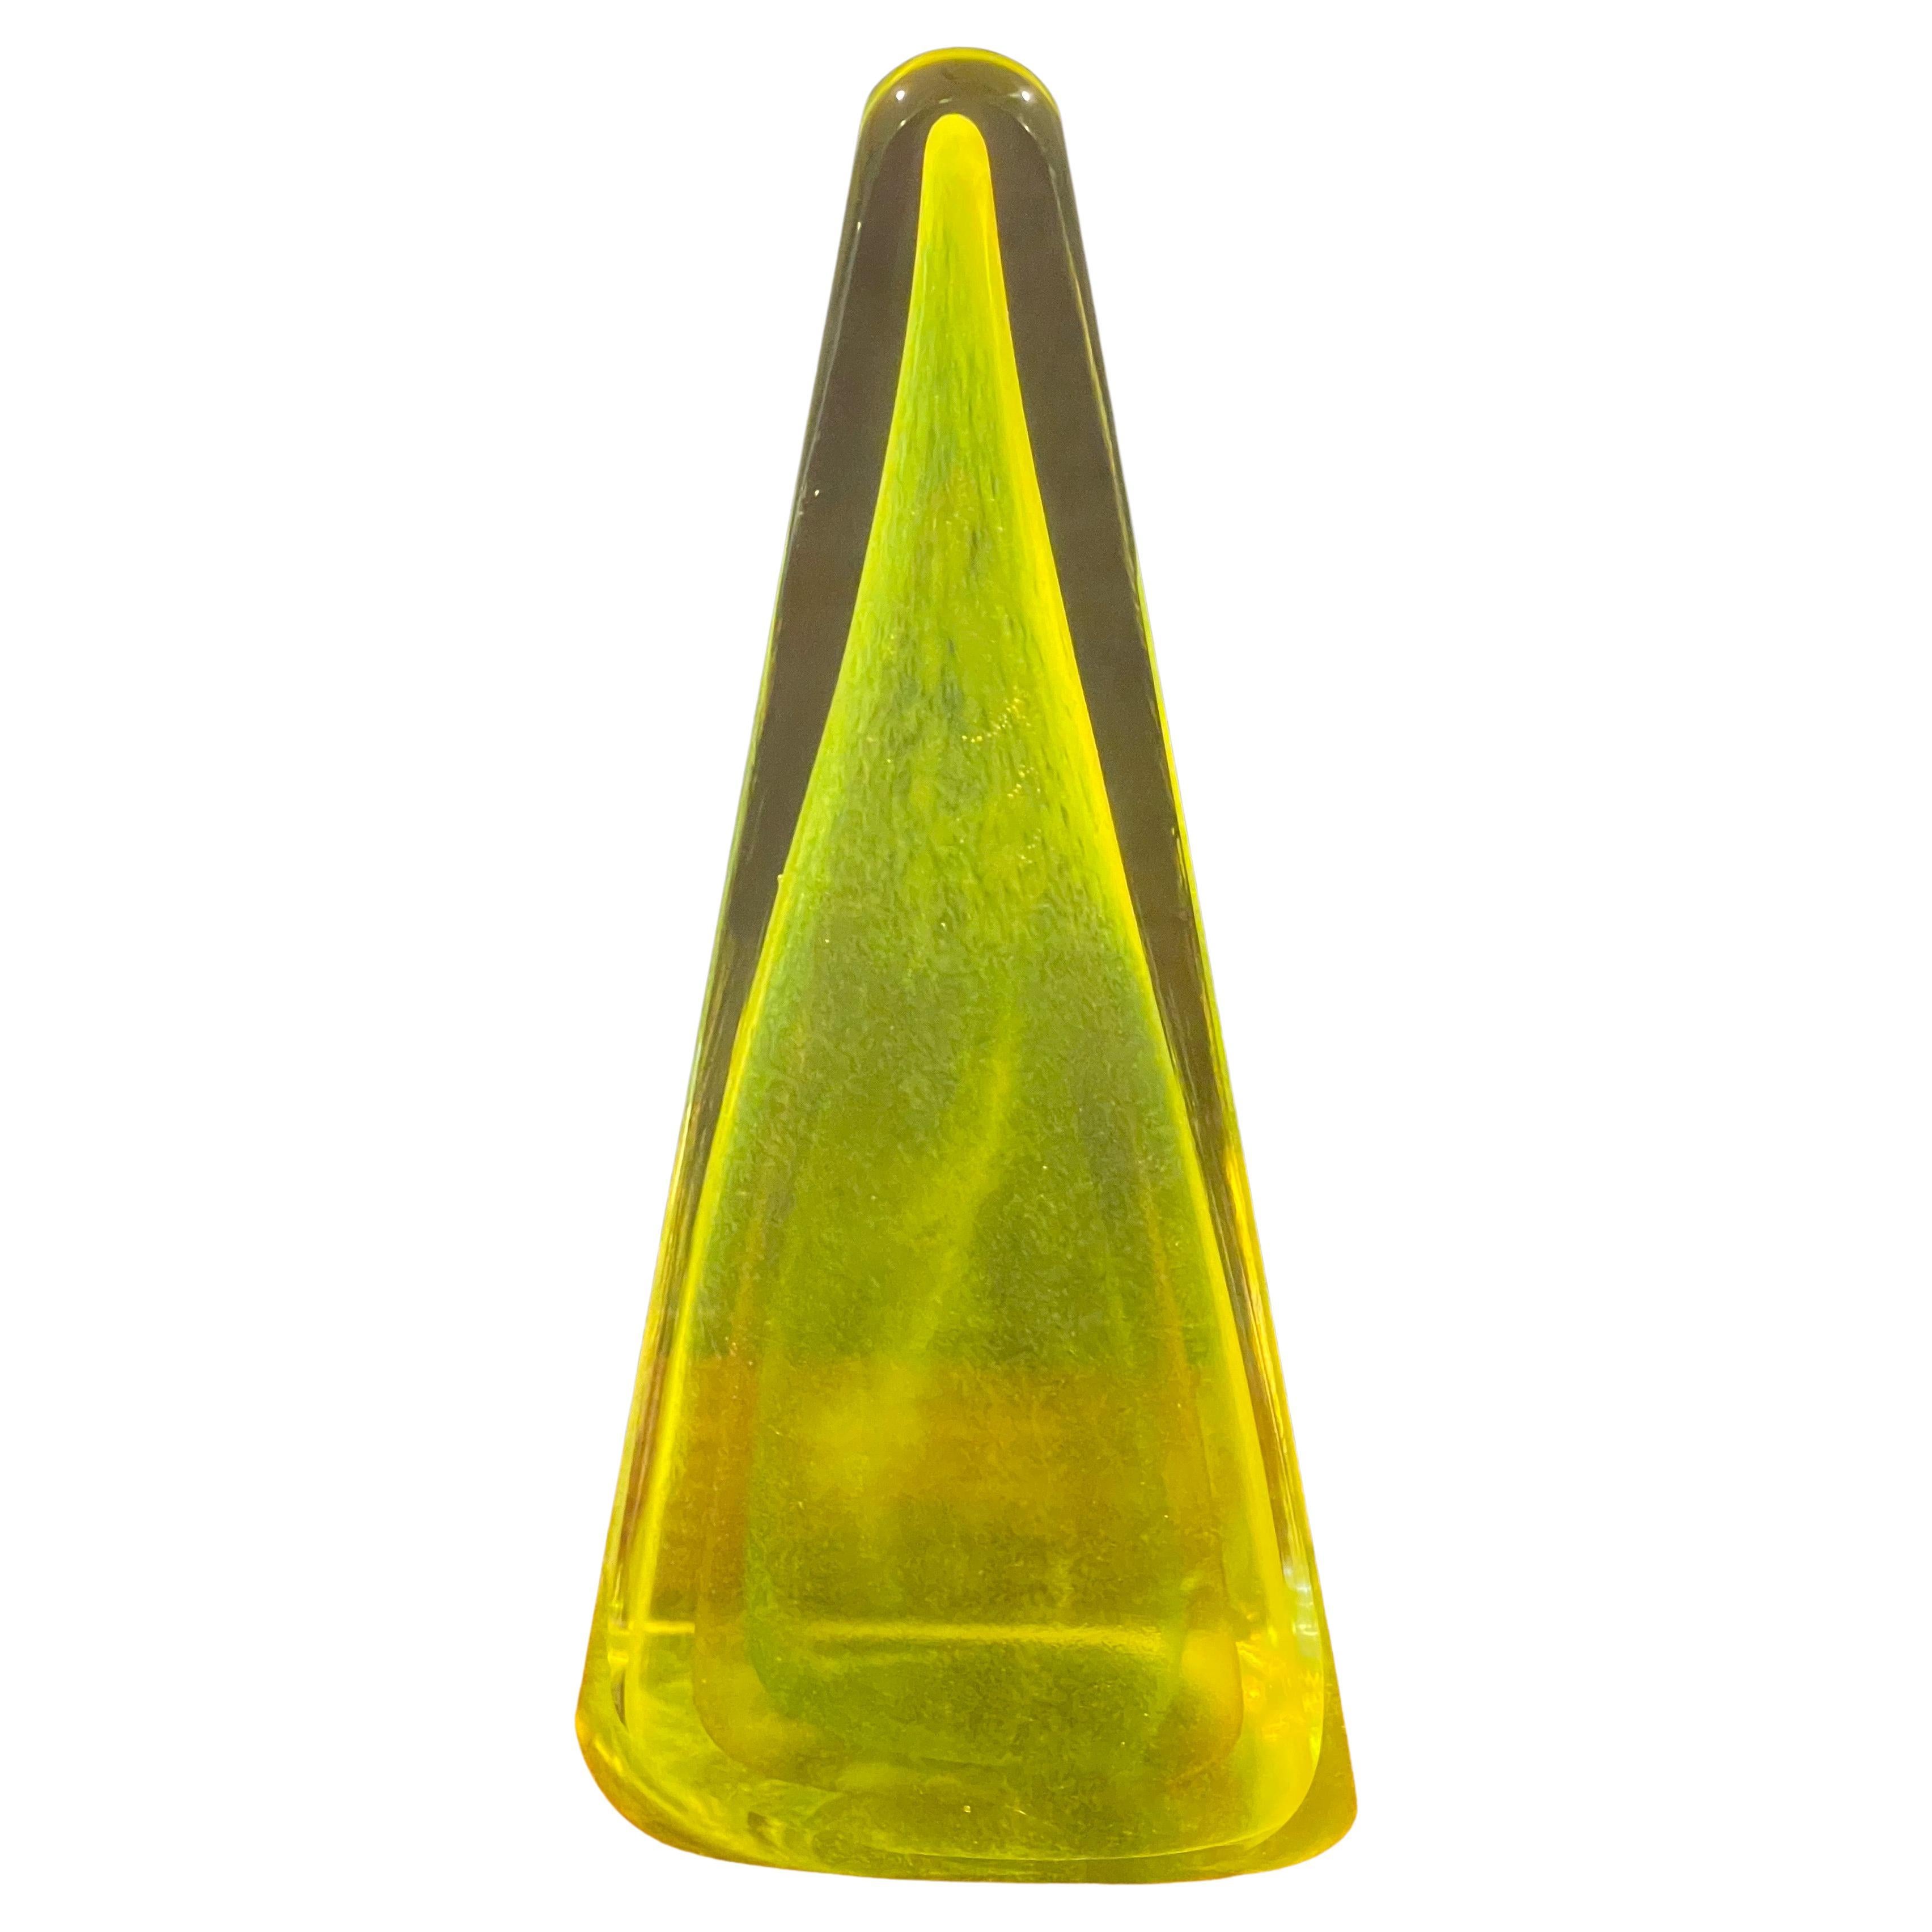 Large sommerso uranium art glass pyramid sculpture by Murano Glass, circa 1970s. The piece is clear glass on the outside with various shades of greenish yellow in the center. The sculpture is in very good vintage condition with no chips or cracks